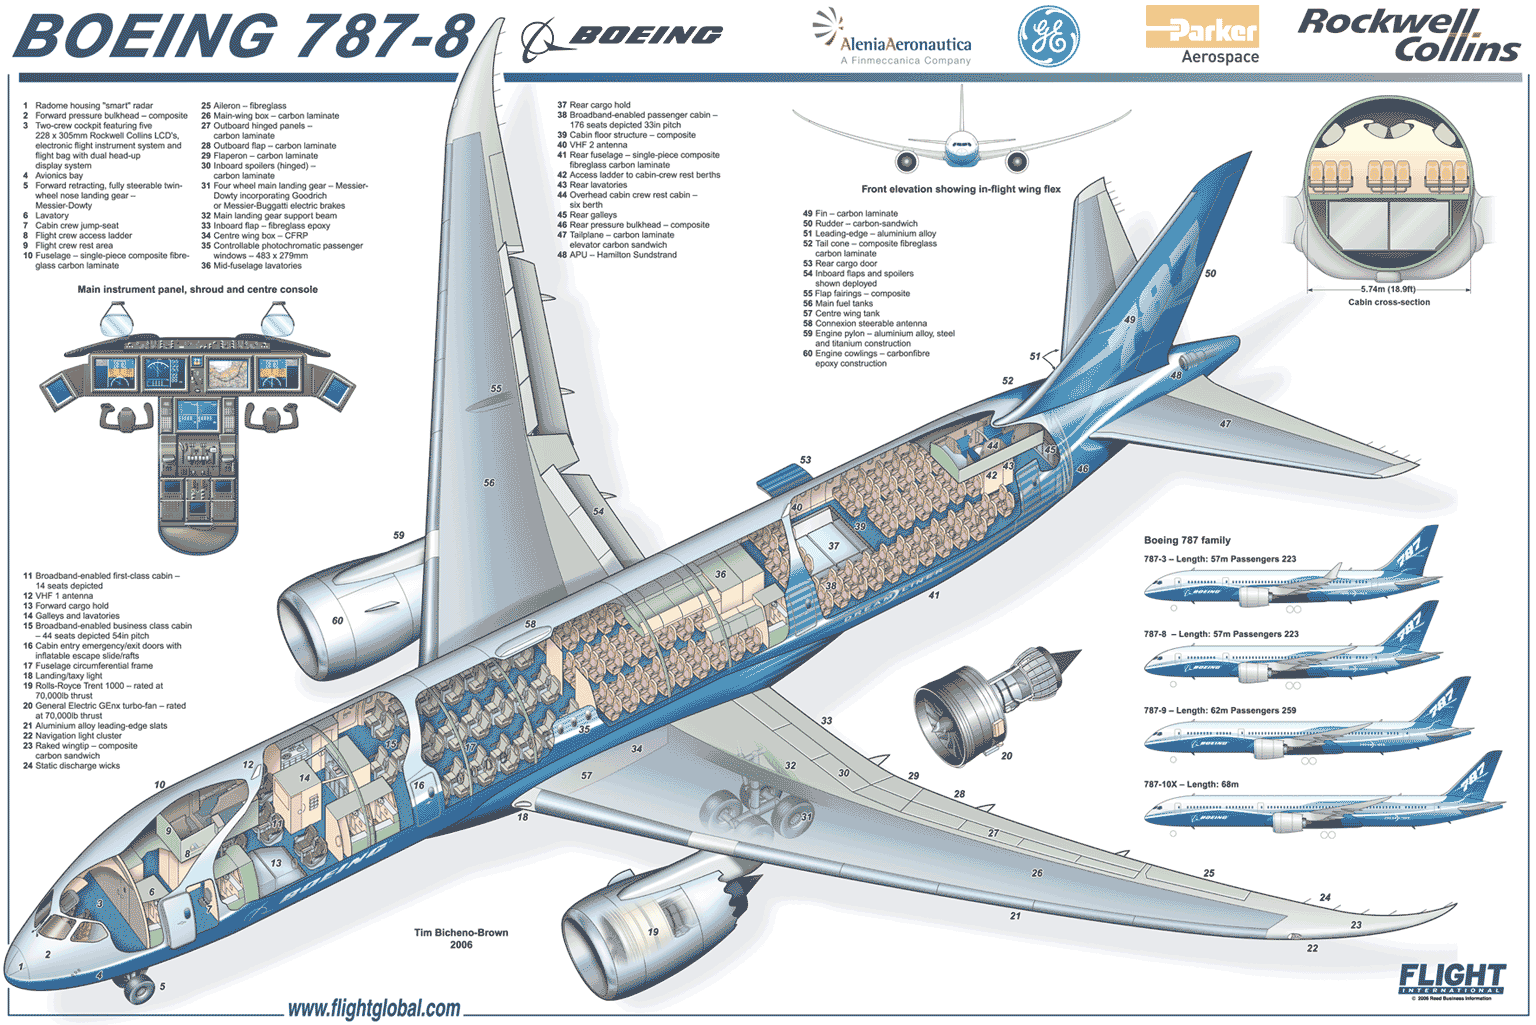 Where is Education's Equivalent of the Boeing 787?